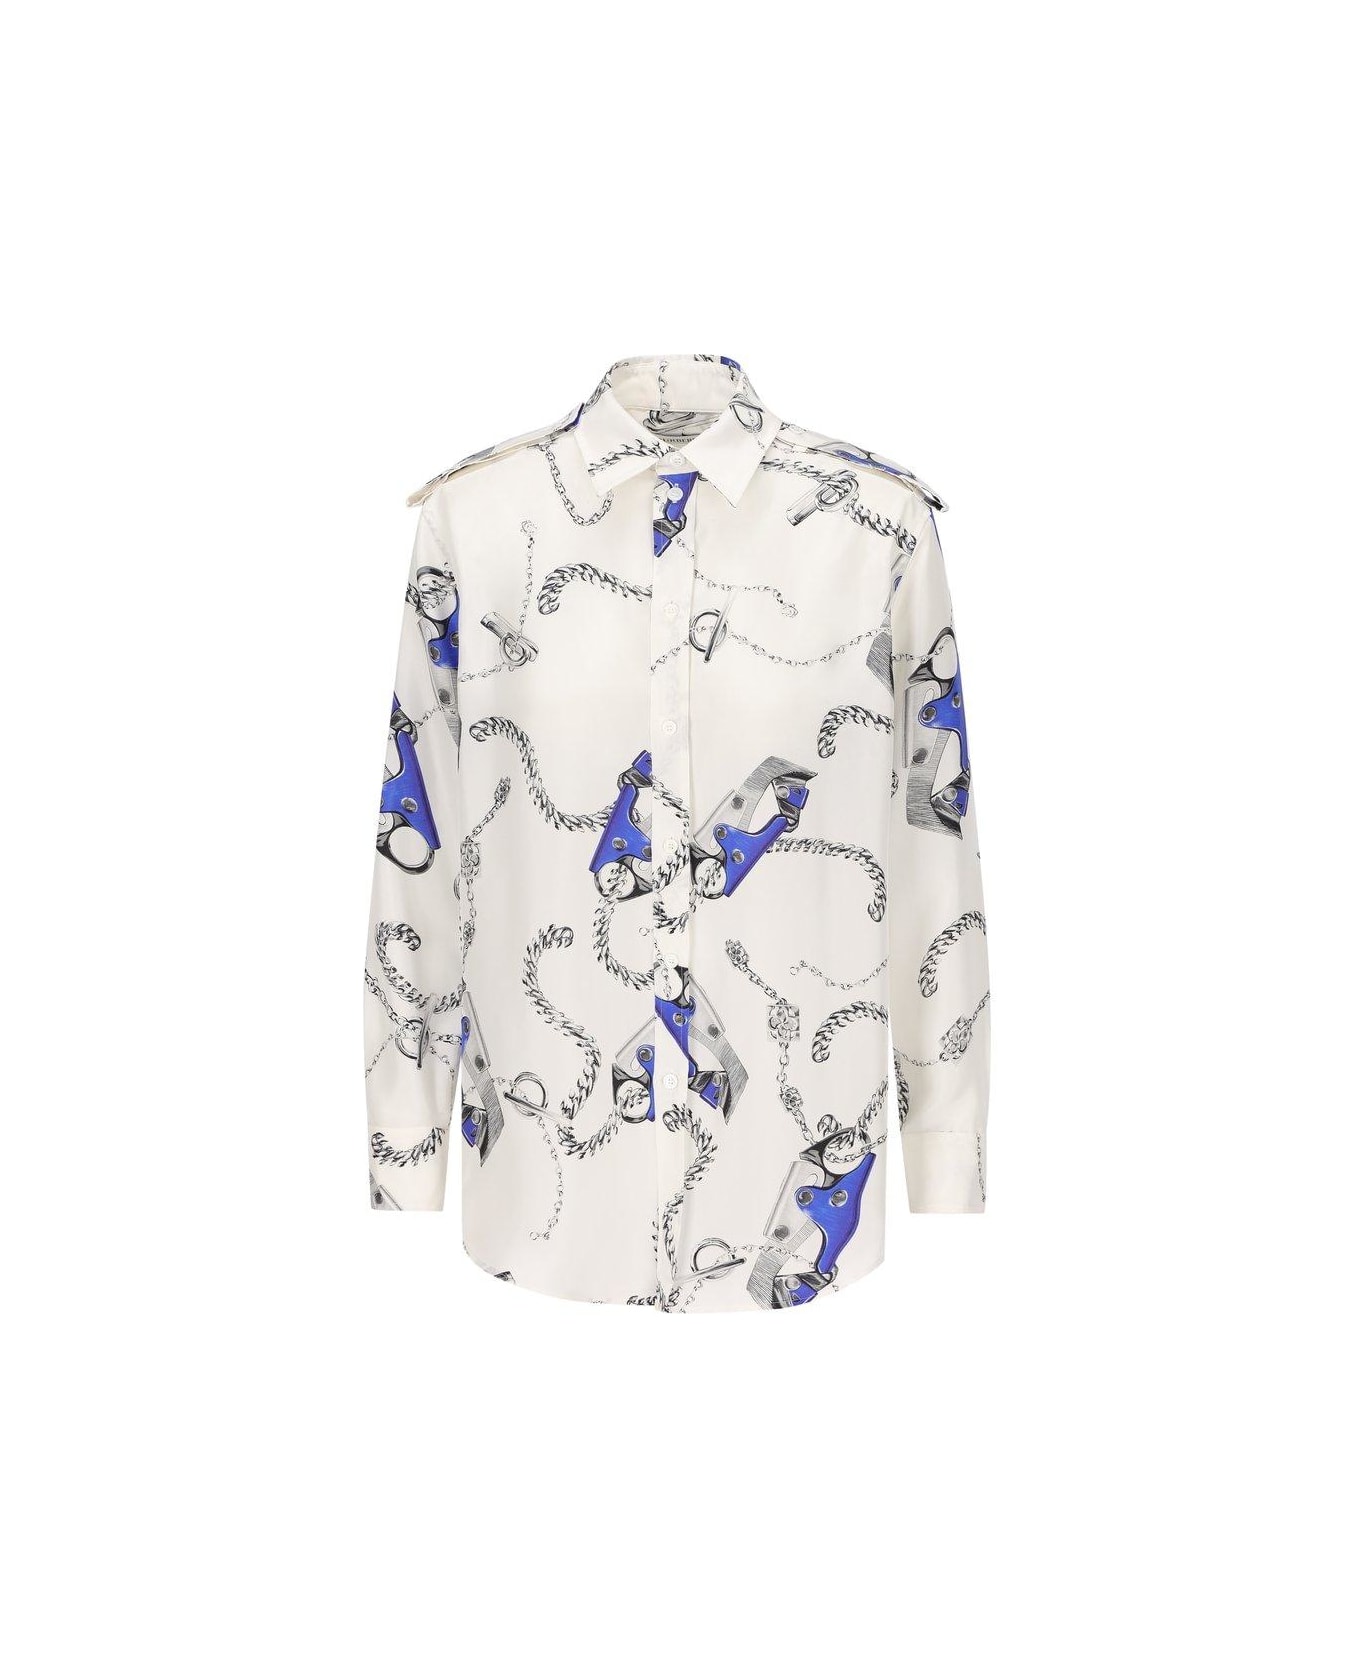 Burberry Graphic Printed Buttoned Shirt - WHITE/BLUE